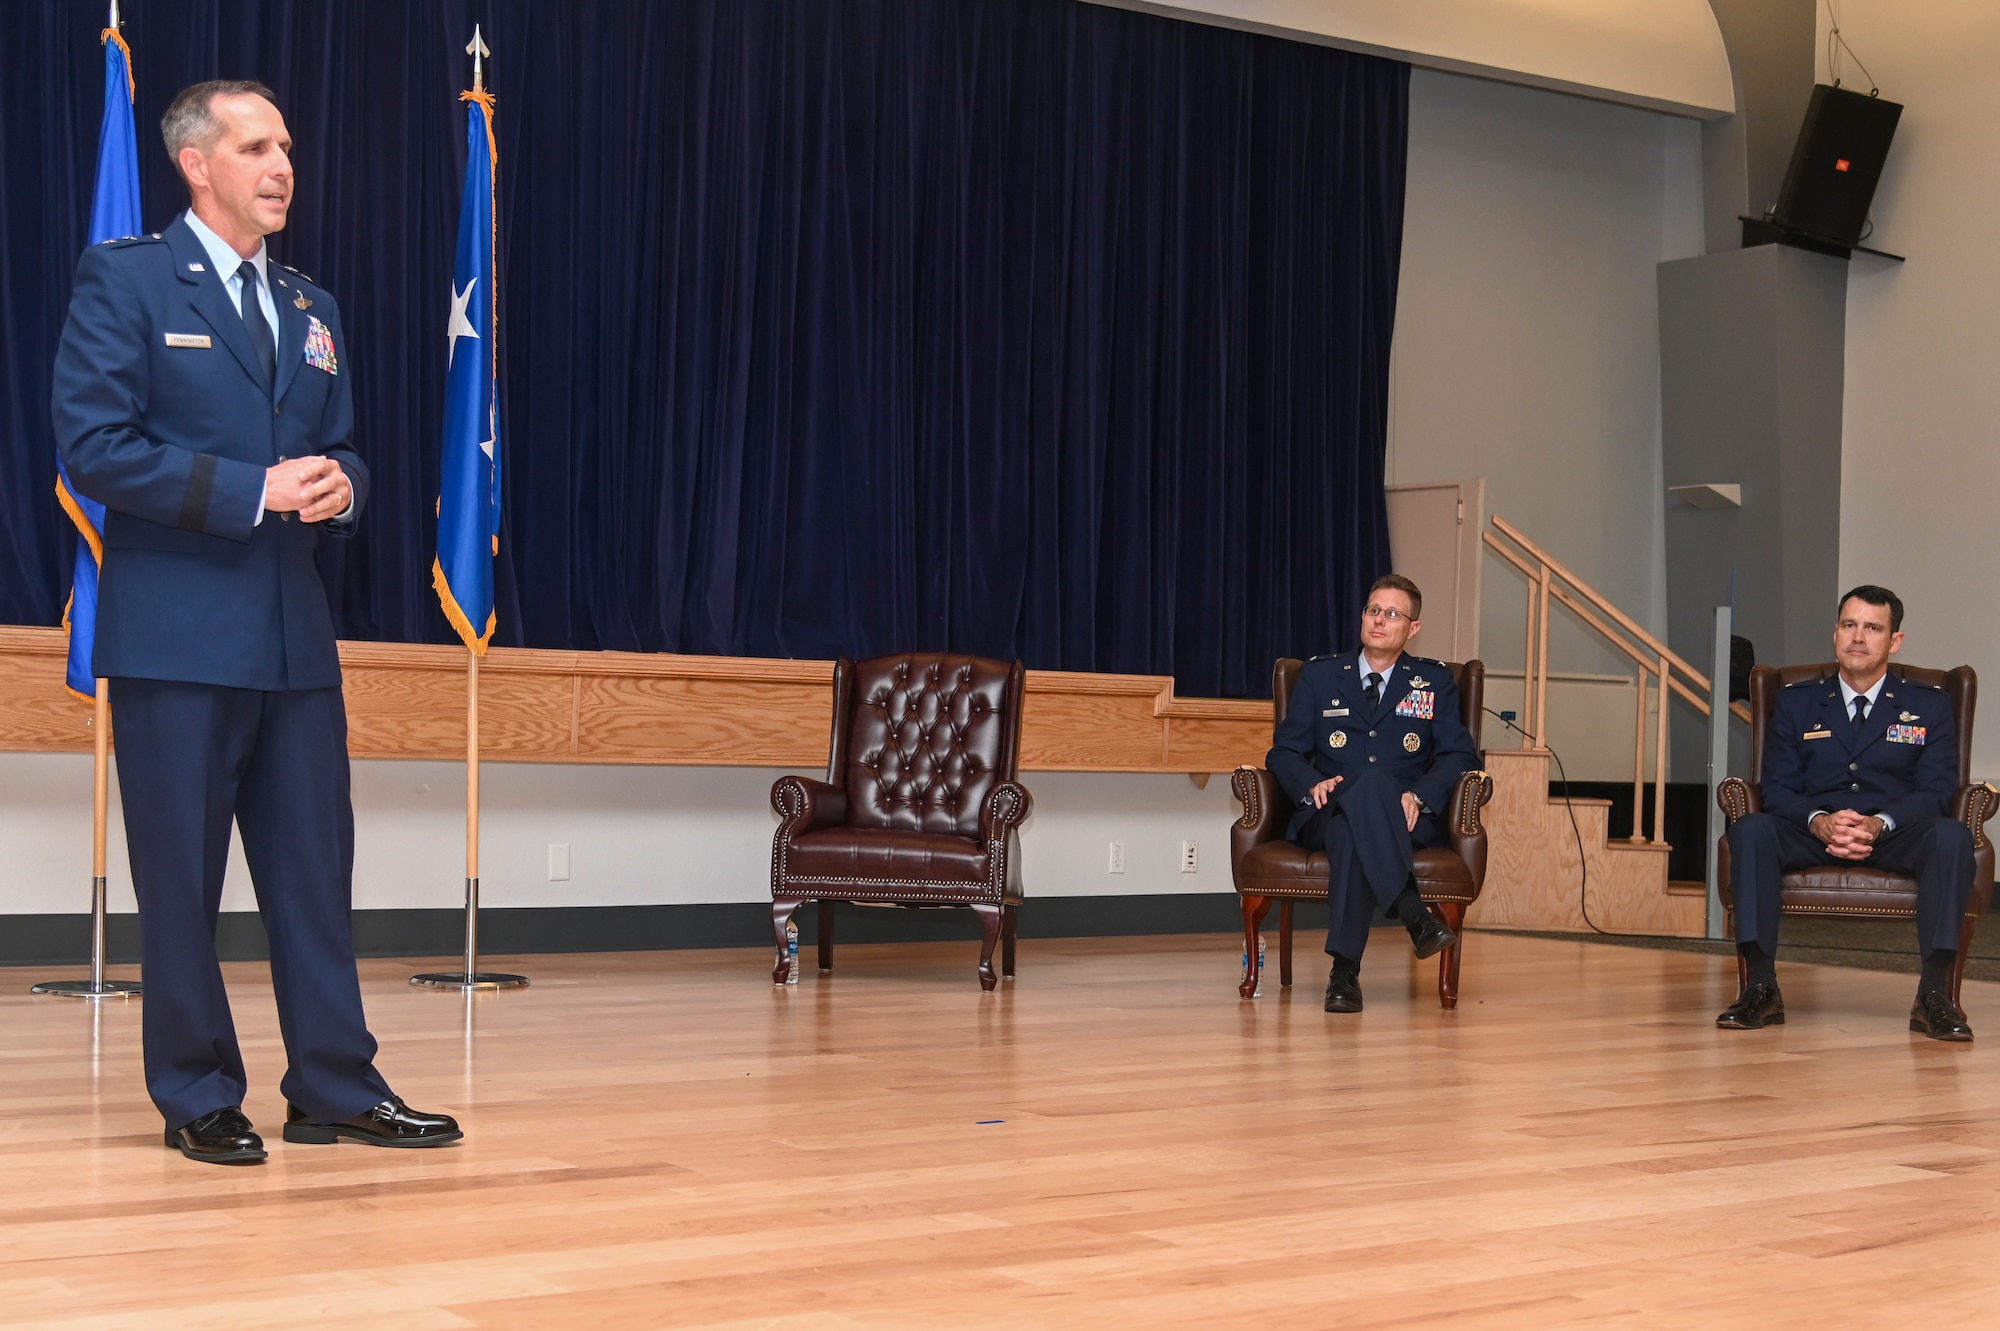 Maj. Gen. Jeffrey Pennington, Fourth Air Force commander from March Air Reserve Base, California, speaks during a change of command ceremony June 12, 2021, at Beale Air Force Base, California.